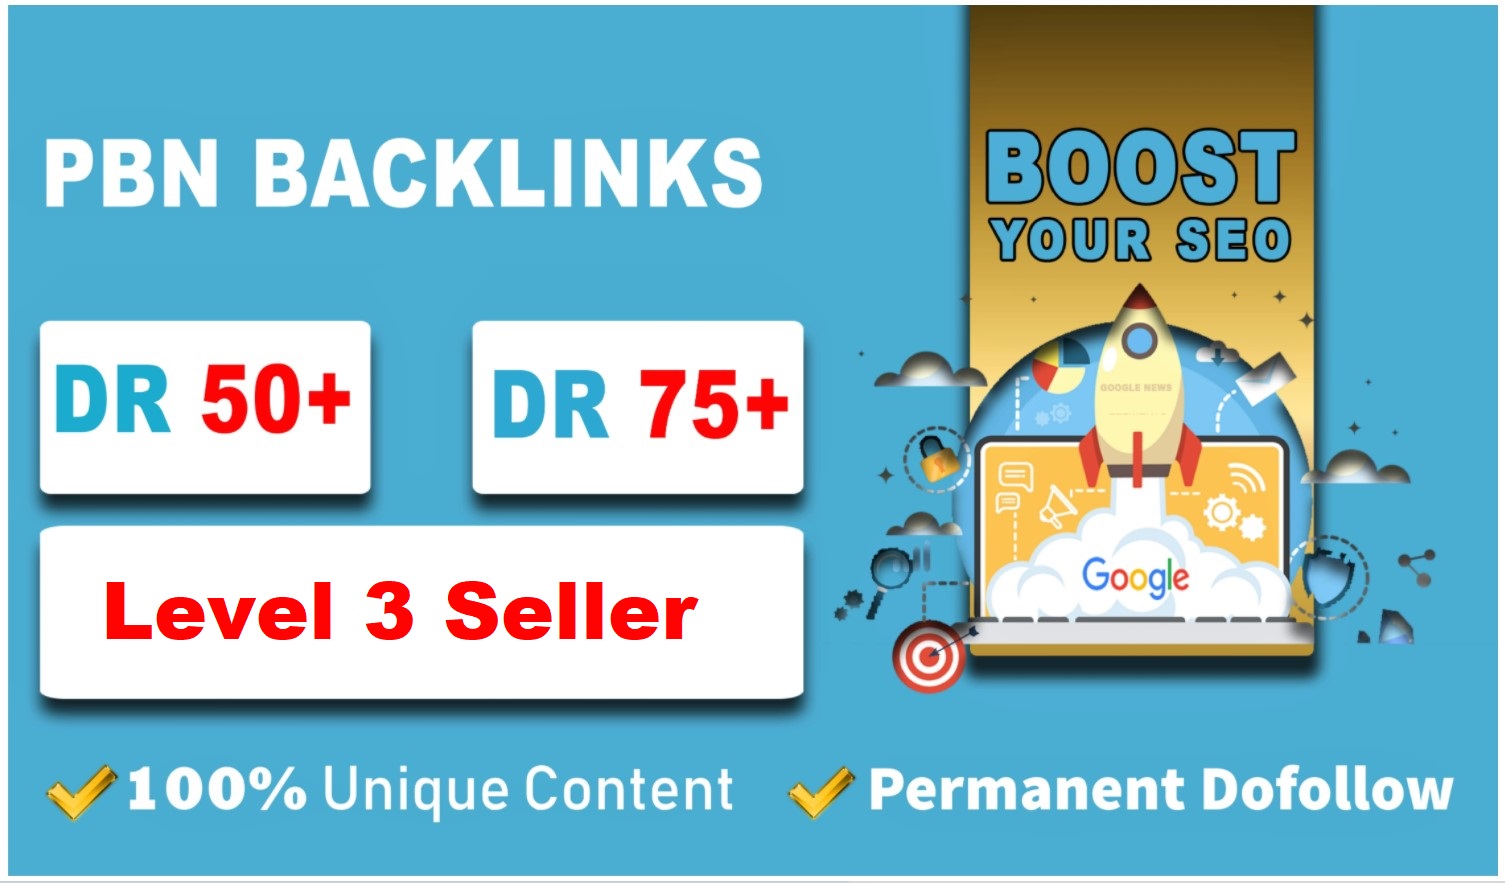 Provide you 50 PBN links from DR 50+ sites